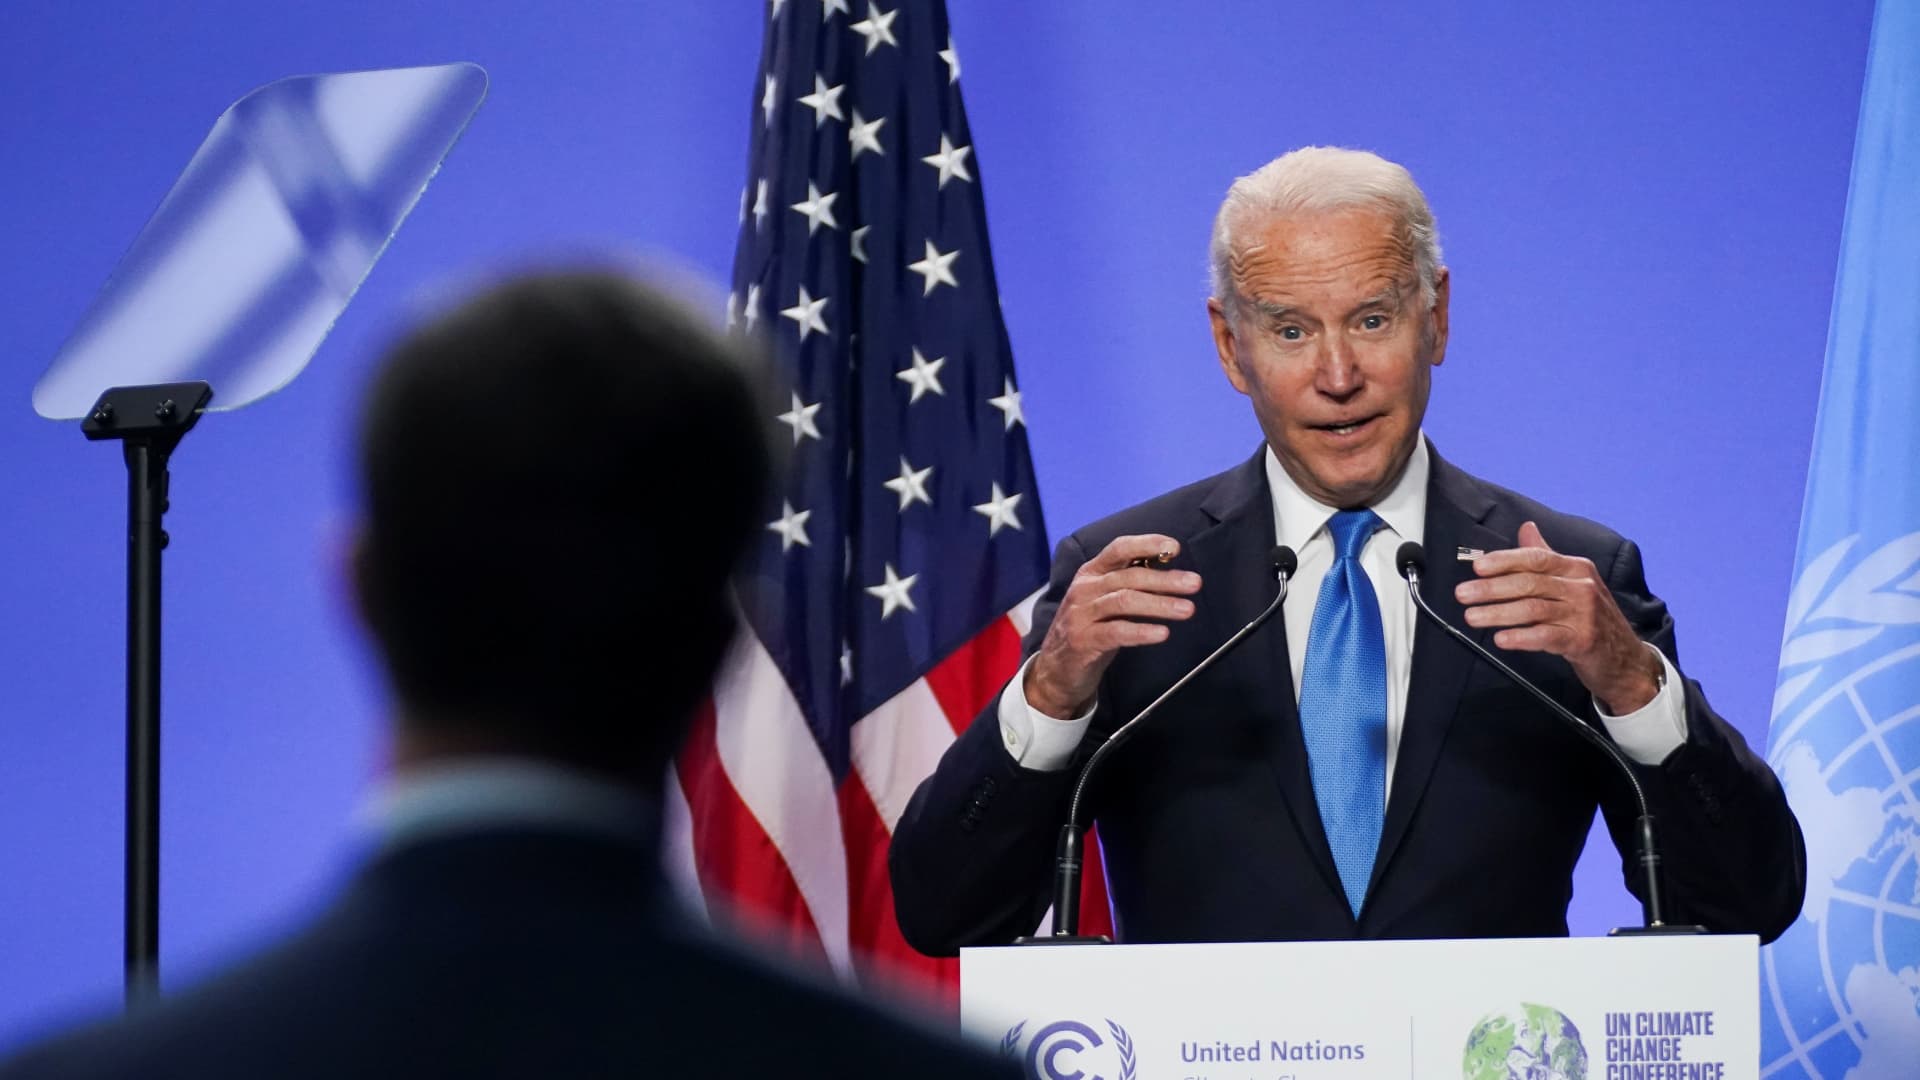 U.S. President Joe Biden speaks during a press conference at the UN Climate Change Conference (COP26) in Glasgow, Scotland, Britain, November 2, 2021.